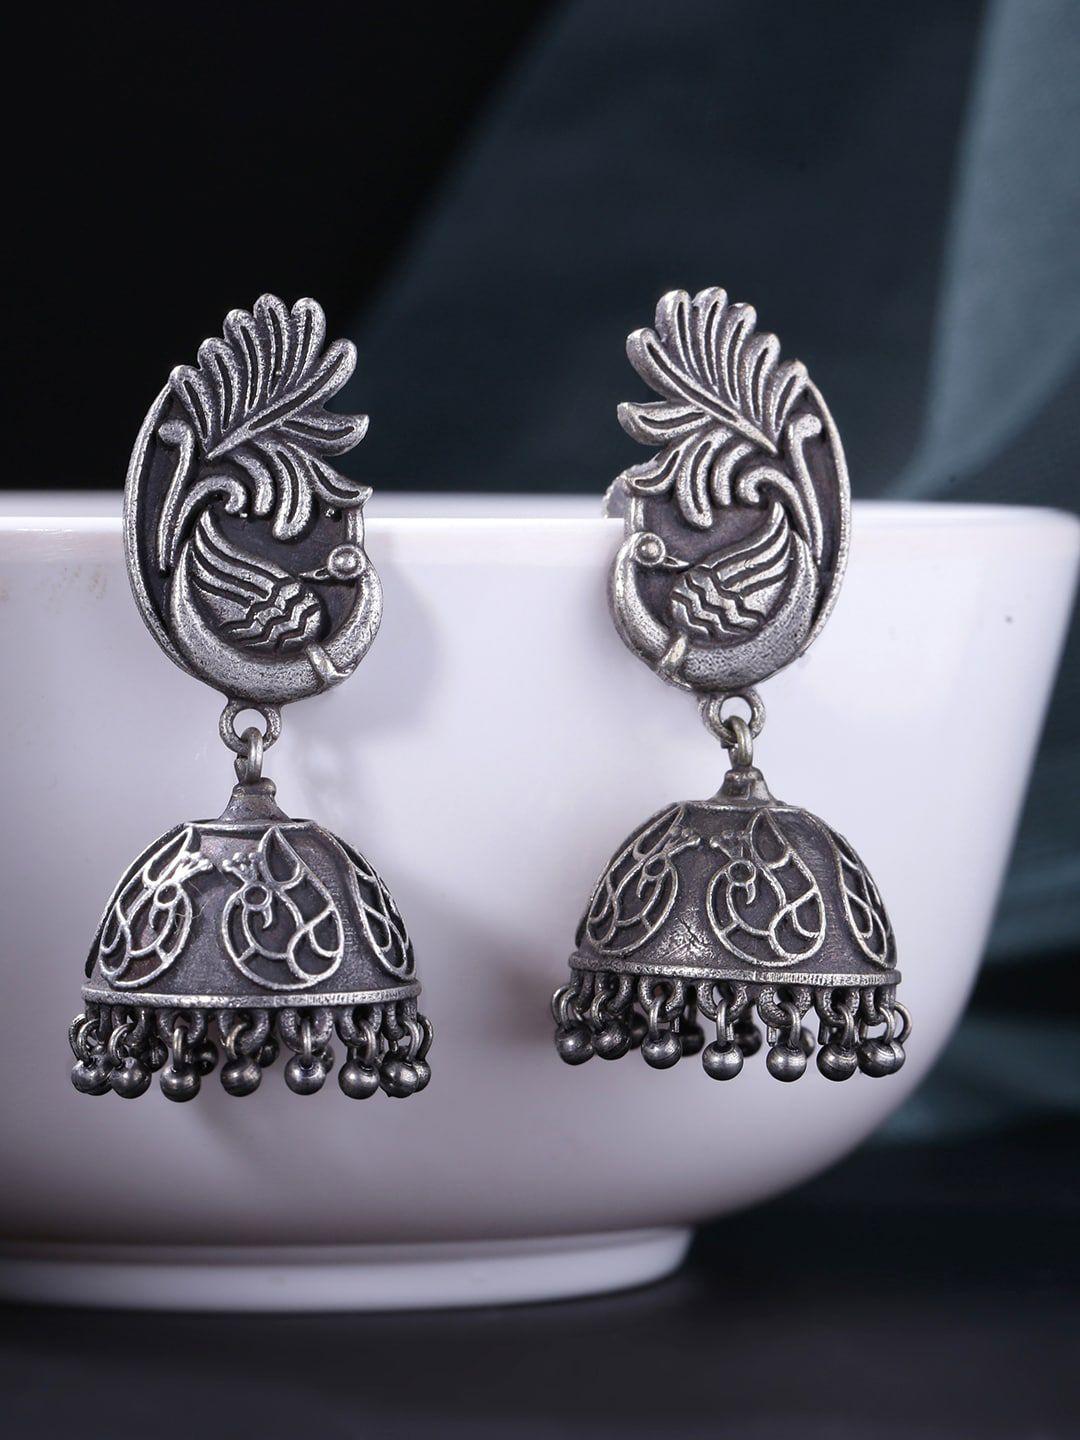 yellow chimes silver-plated peacock shaped jhumkas